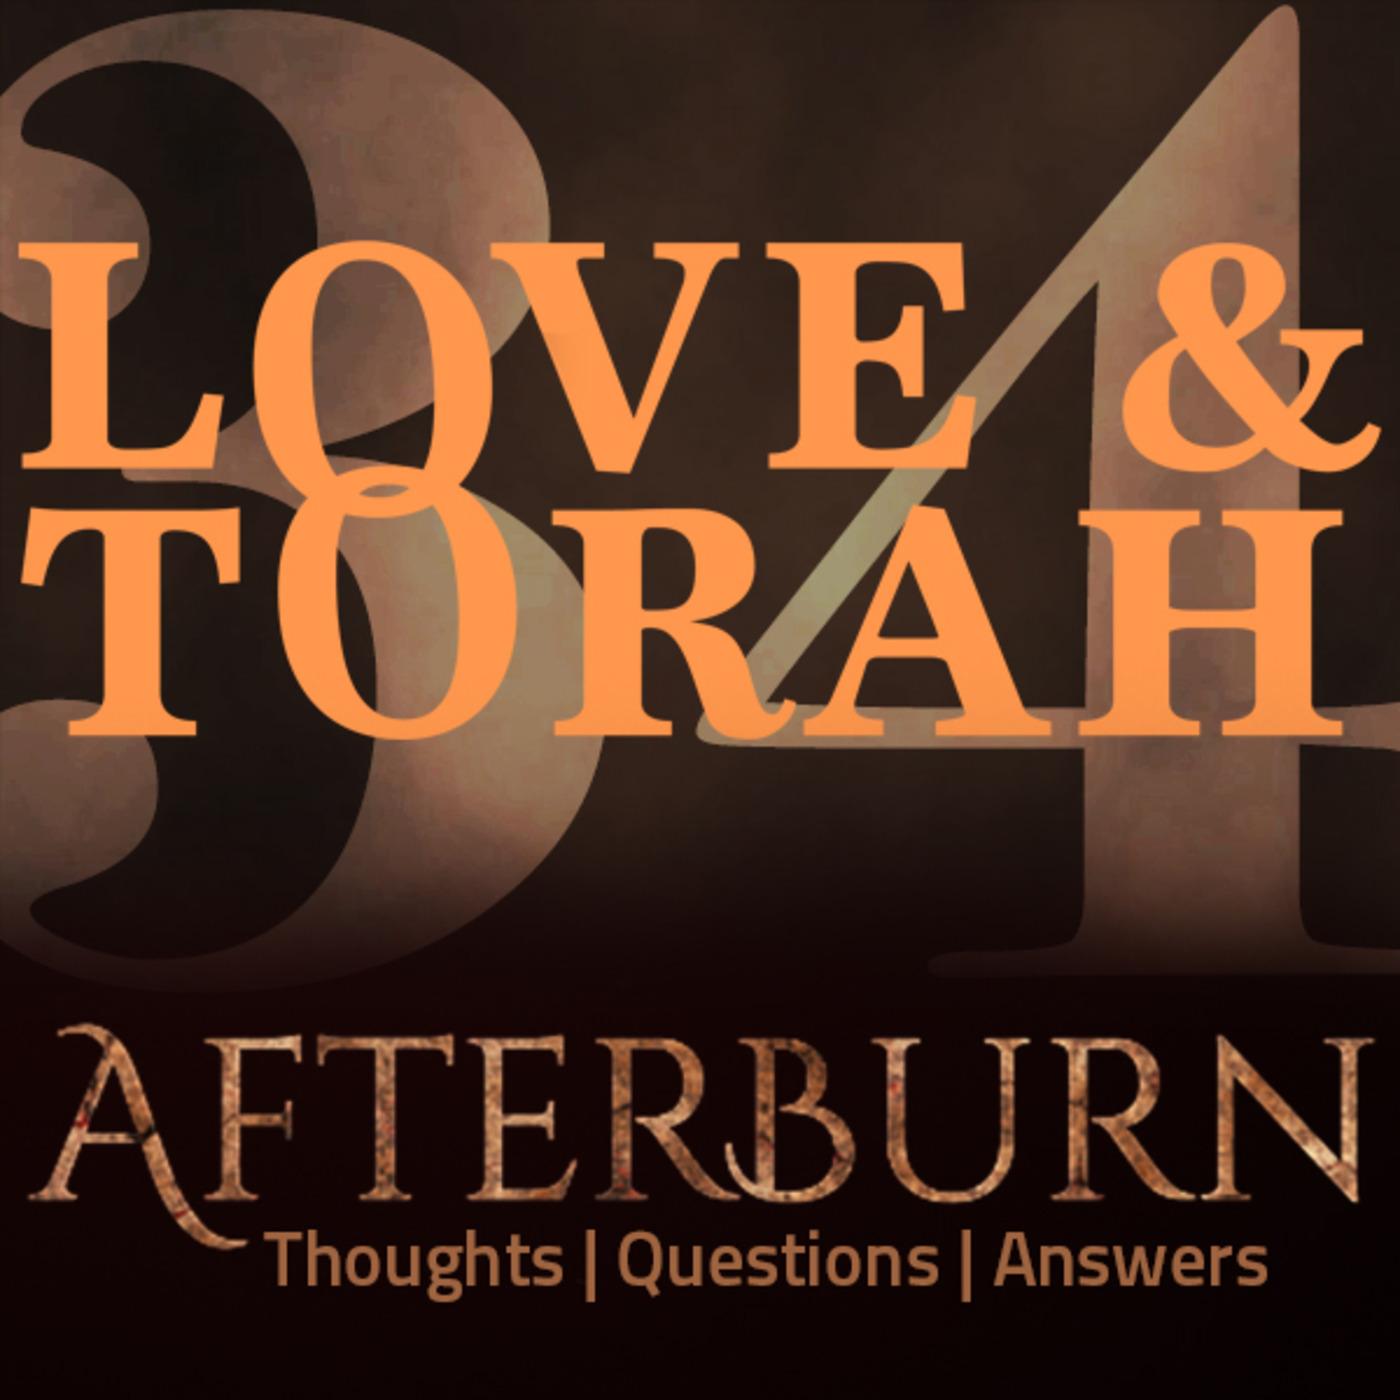 Episode 633: Afterburn | Thoughts, Q&A on Love and Torah | Part 34